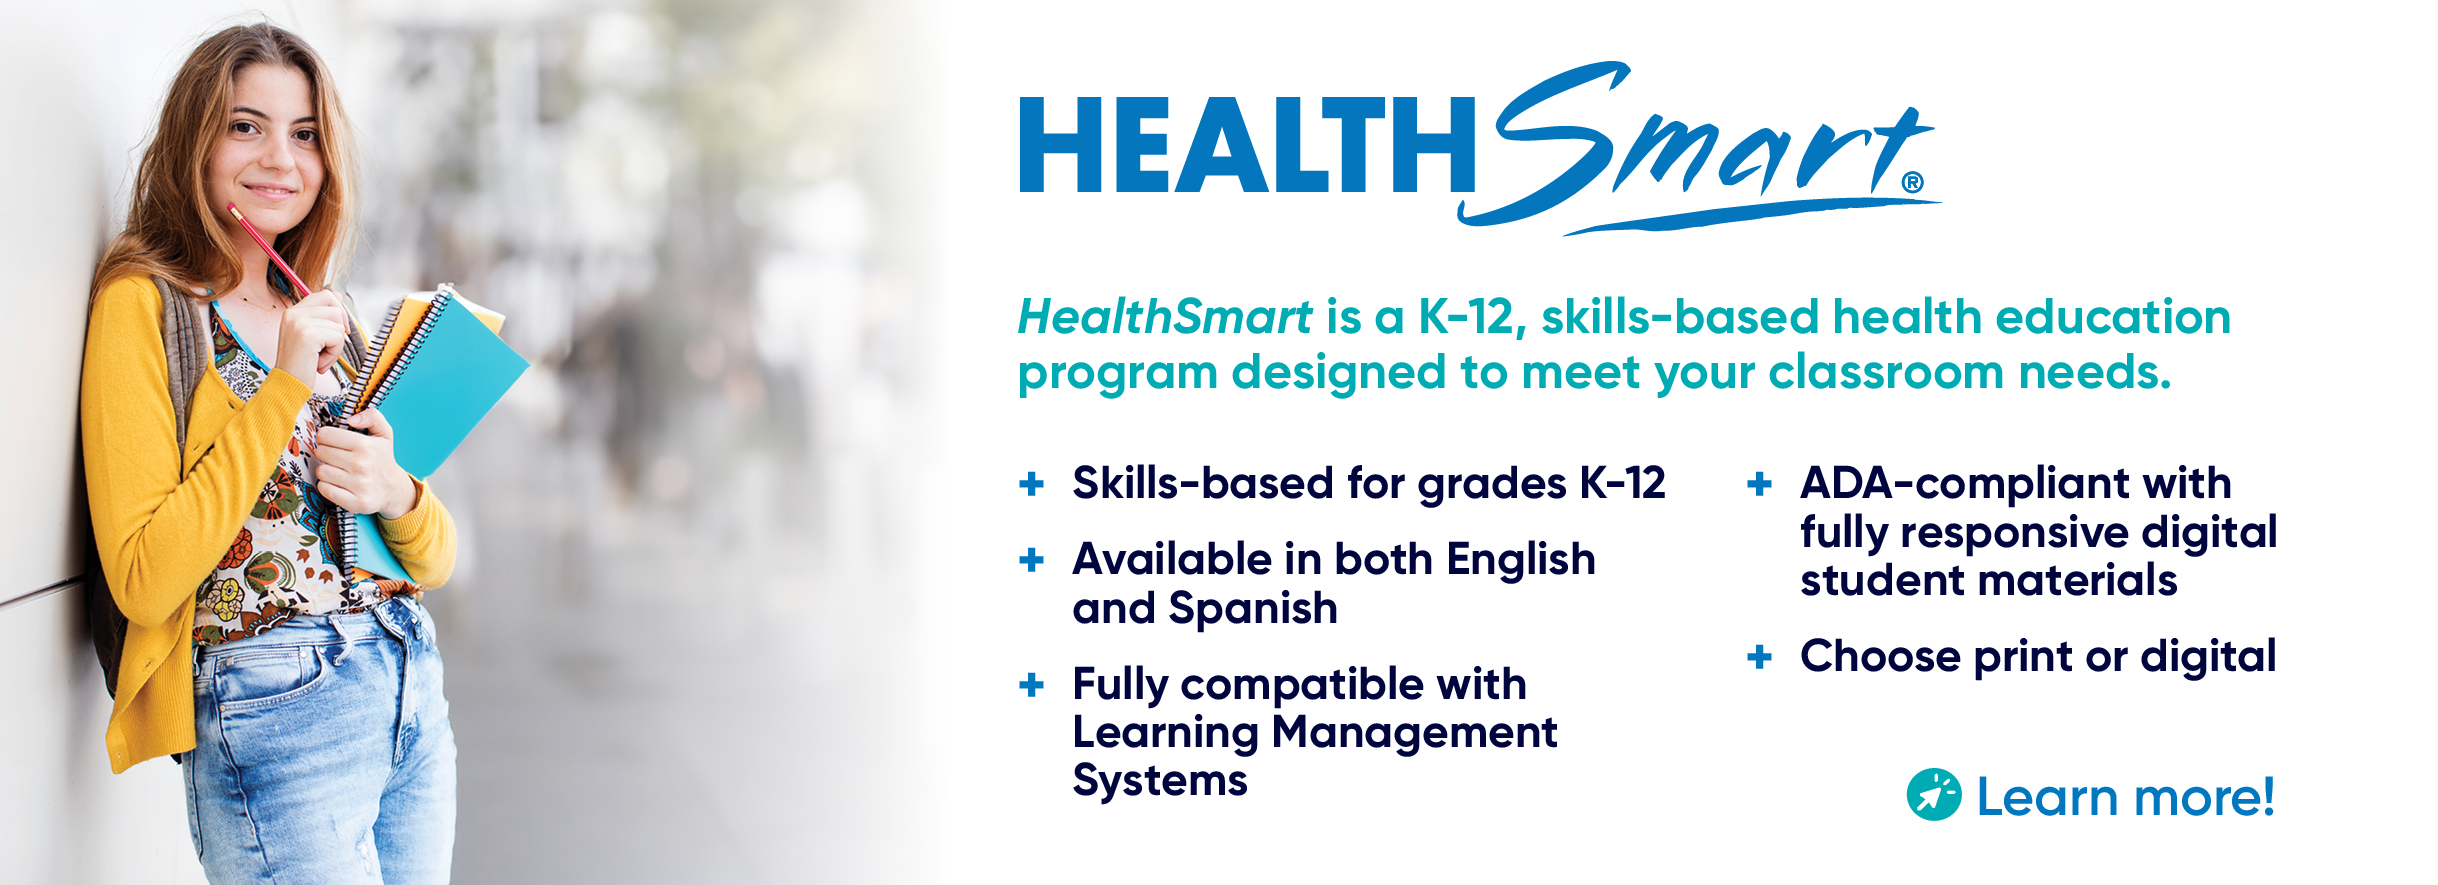 Lifestyle photo of a young person in school next to copy detailing HealthSmart curriculum